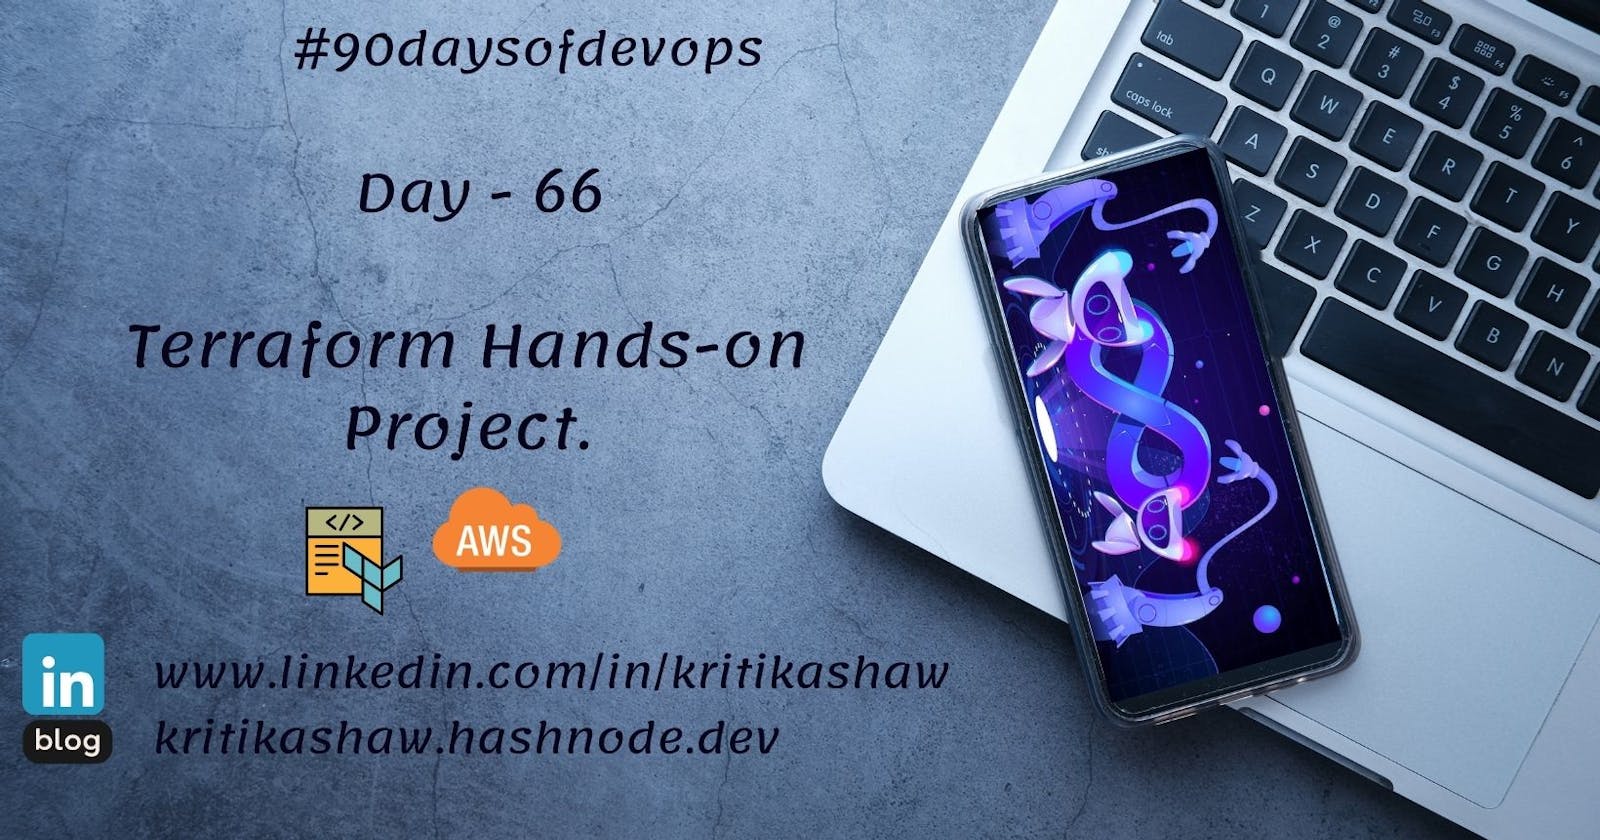 Day 66 Terraform Hands-on Project - Build Your Own AWS Infrastructure with Ease using Infrastructure as Code (IaC) Techniques.